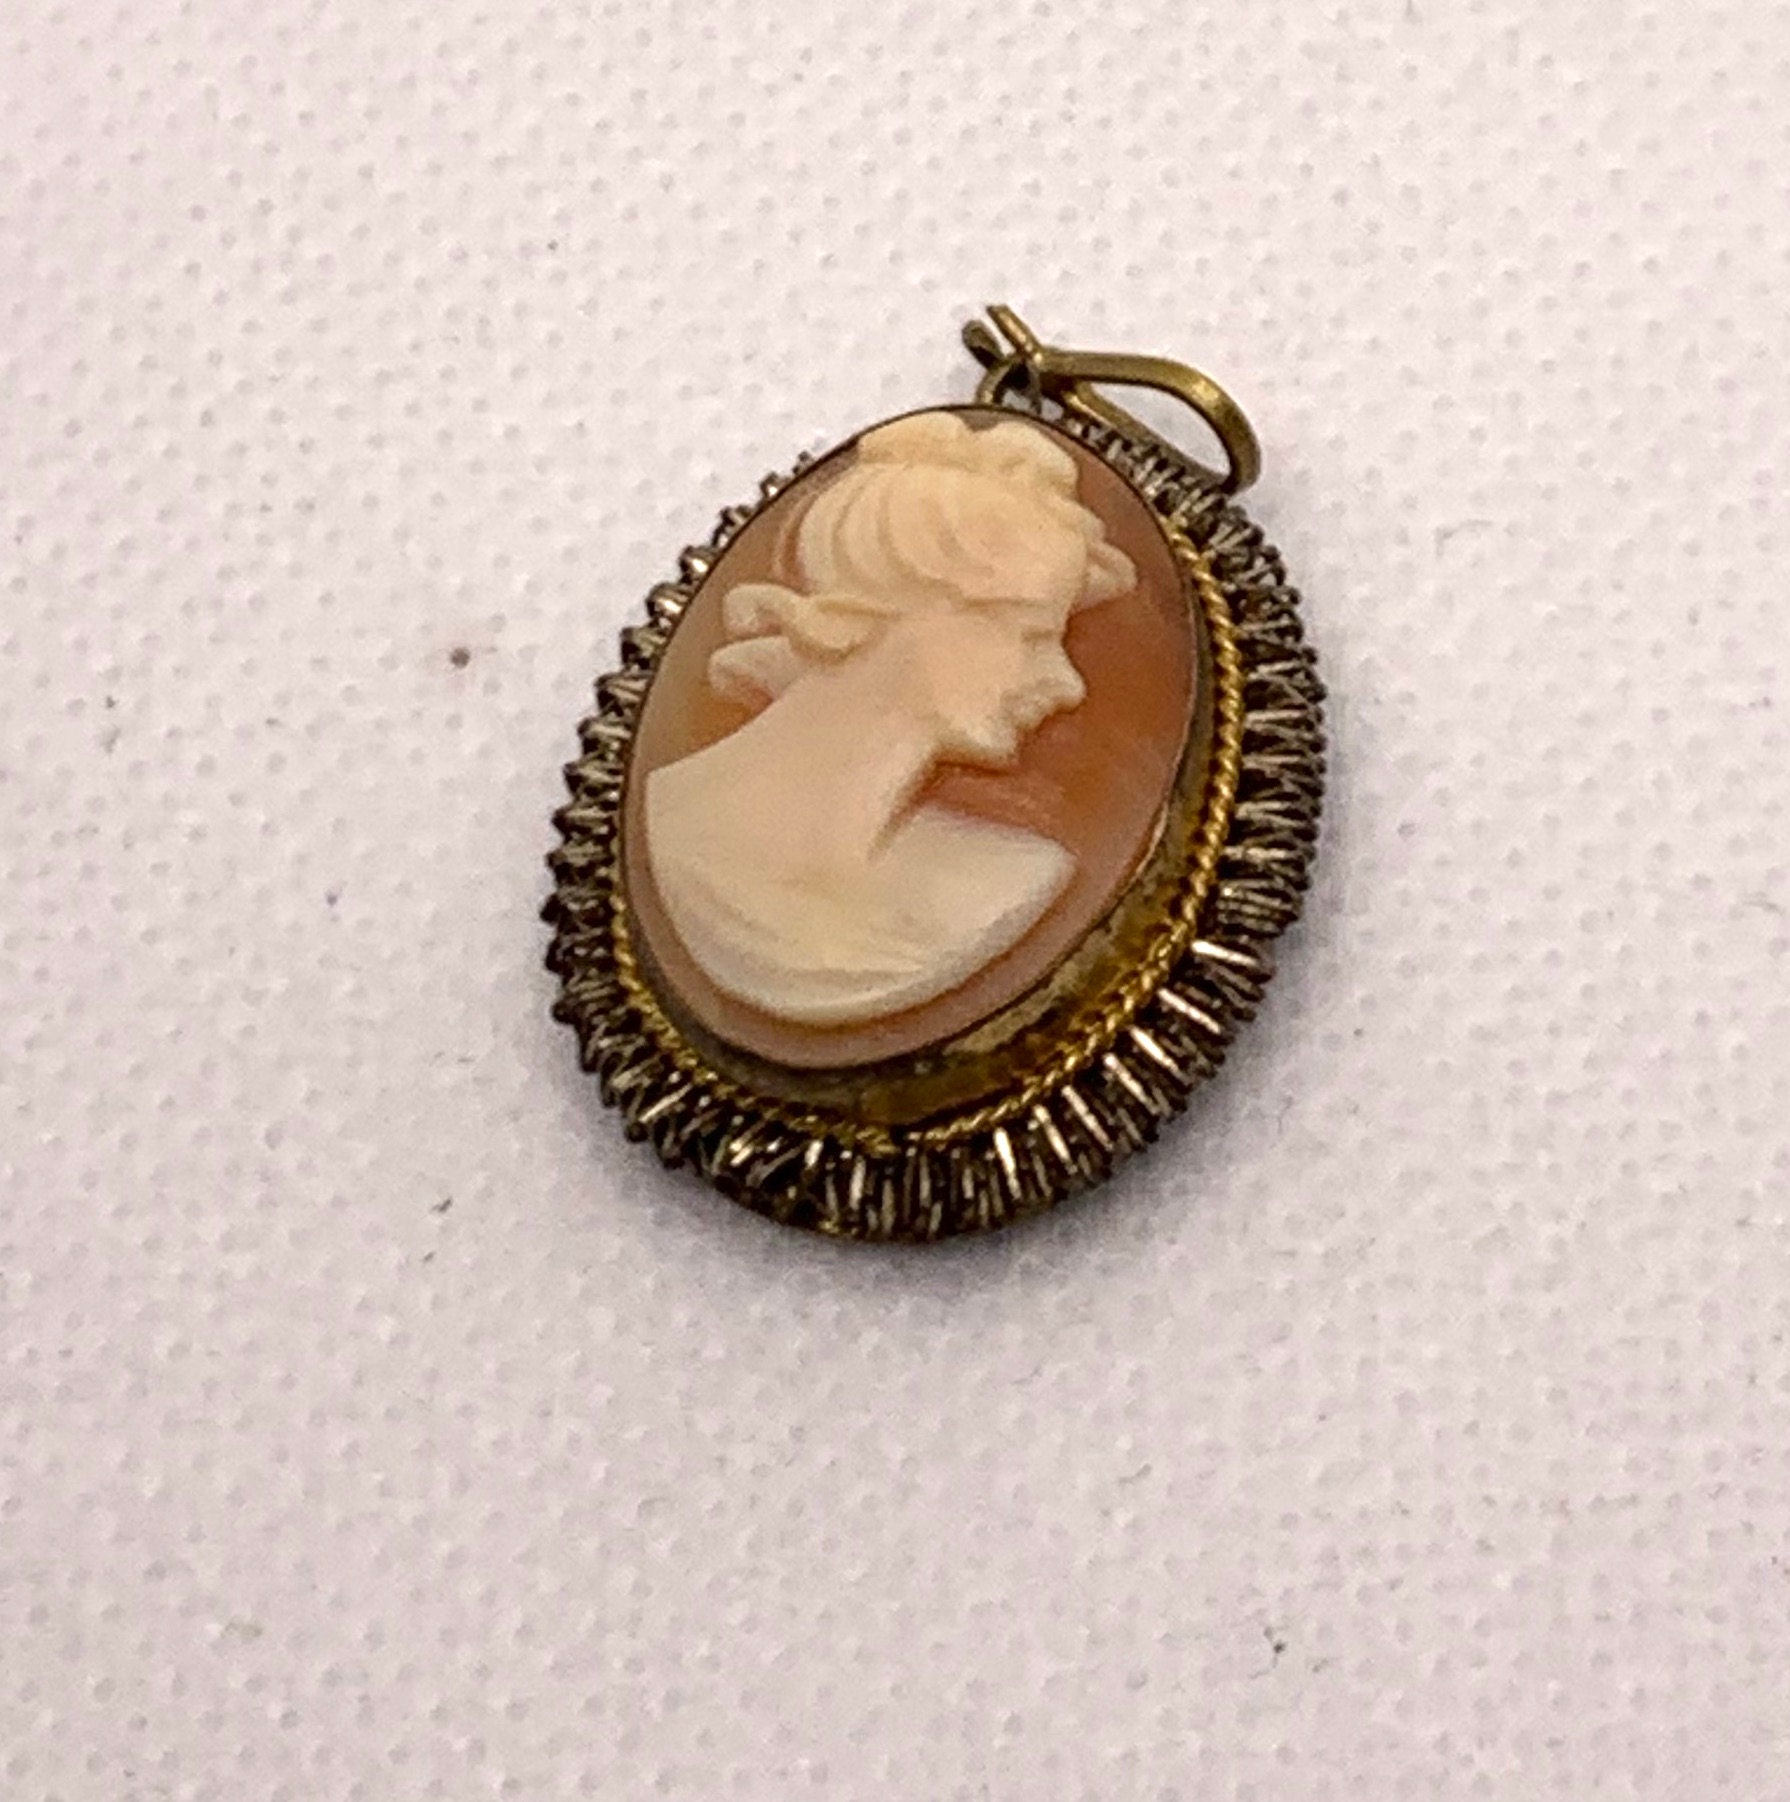 Vintage Oval Gold Tone Carved Cameo Pendant With Beaded Border | Etsy